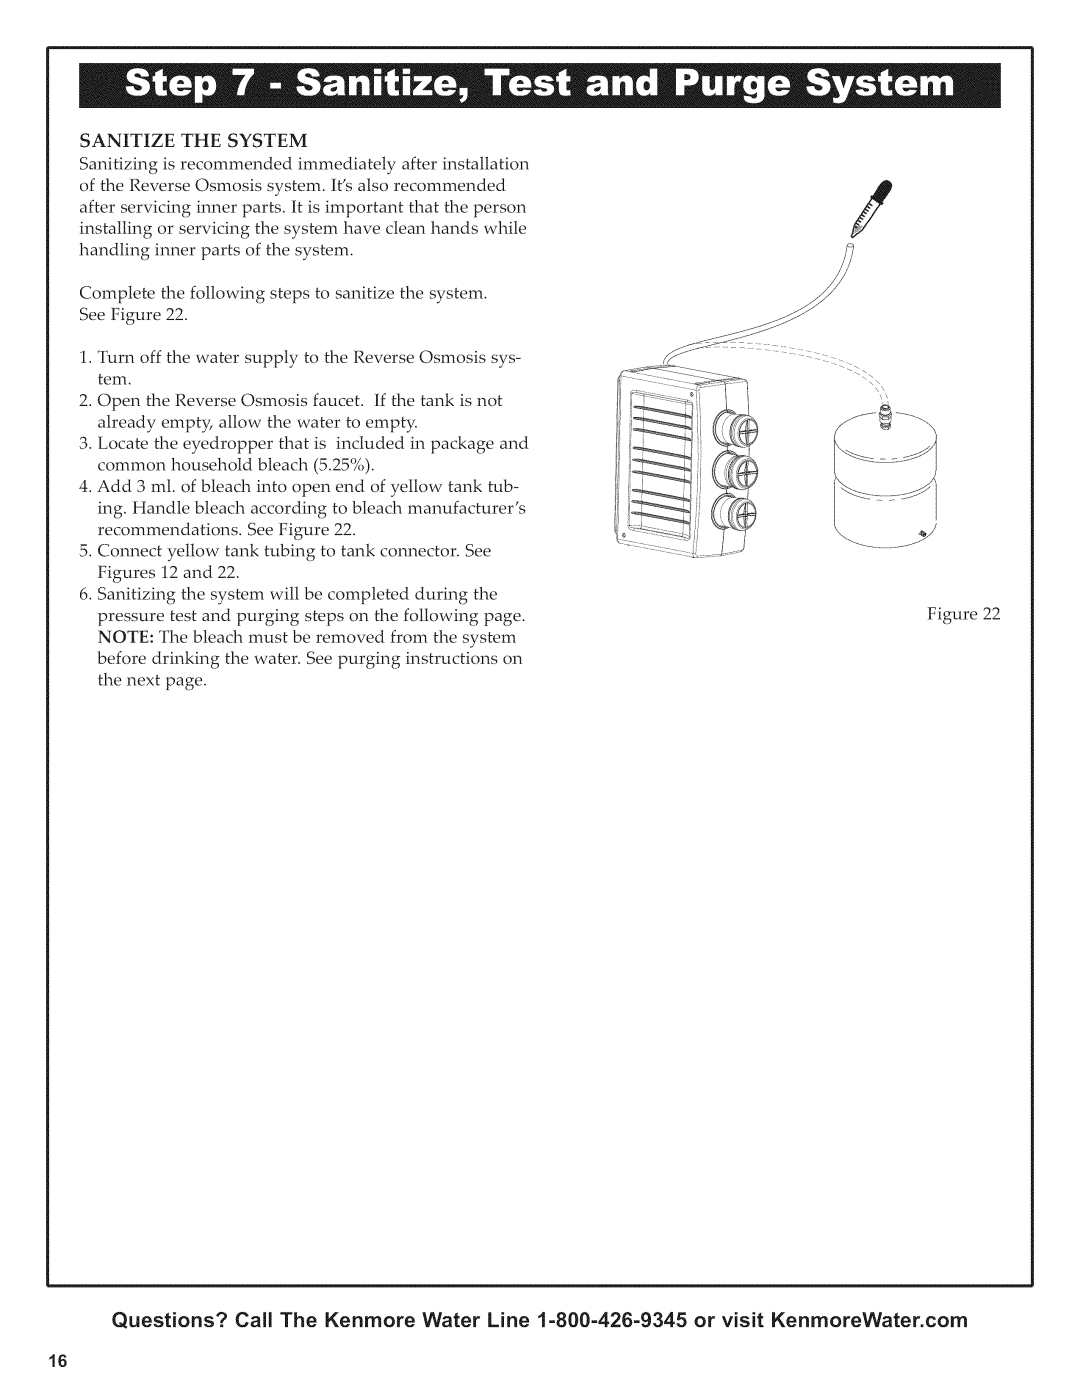 Kenmore 625.38556 owner manual Sanitize The System 